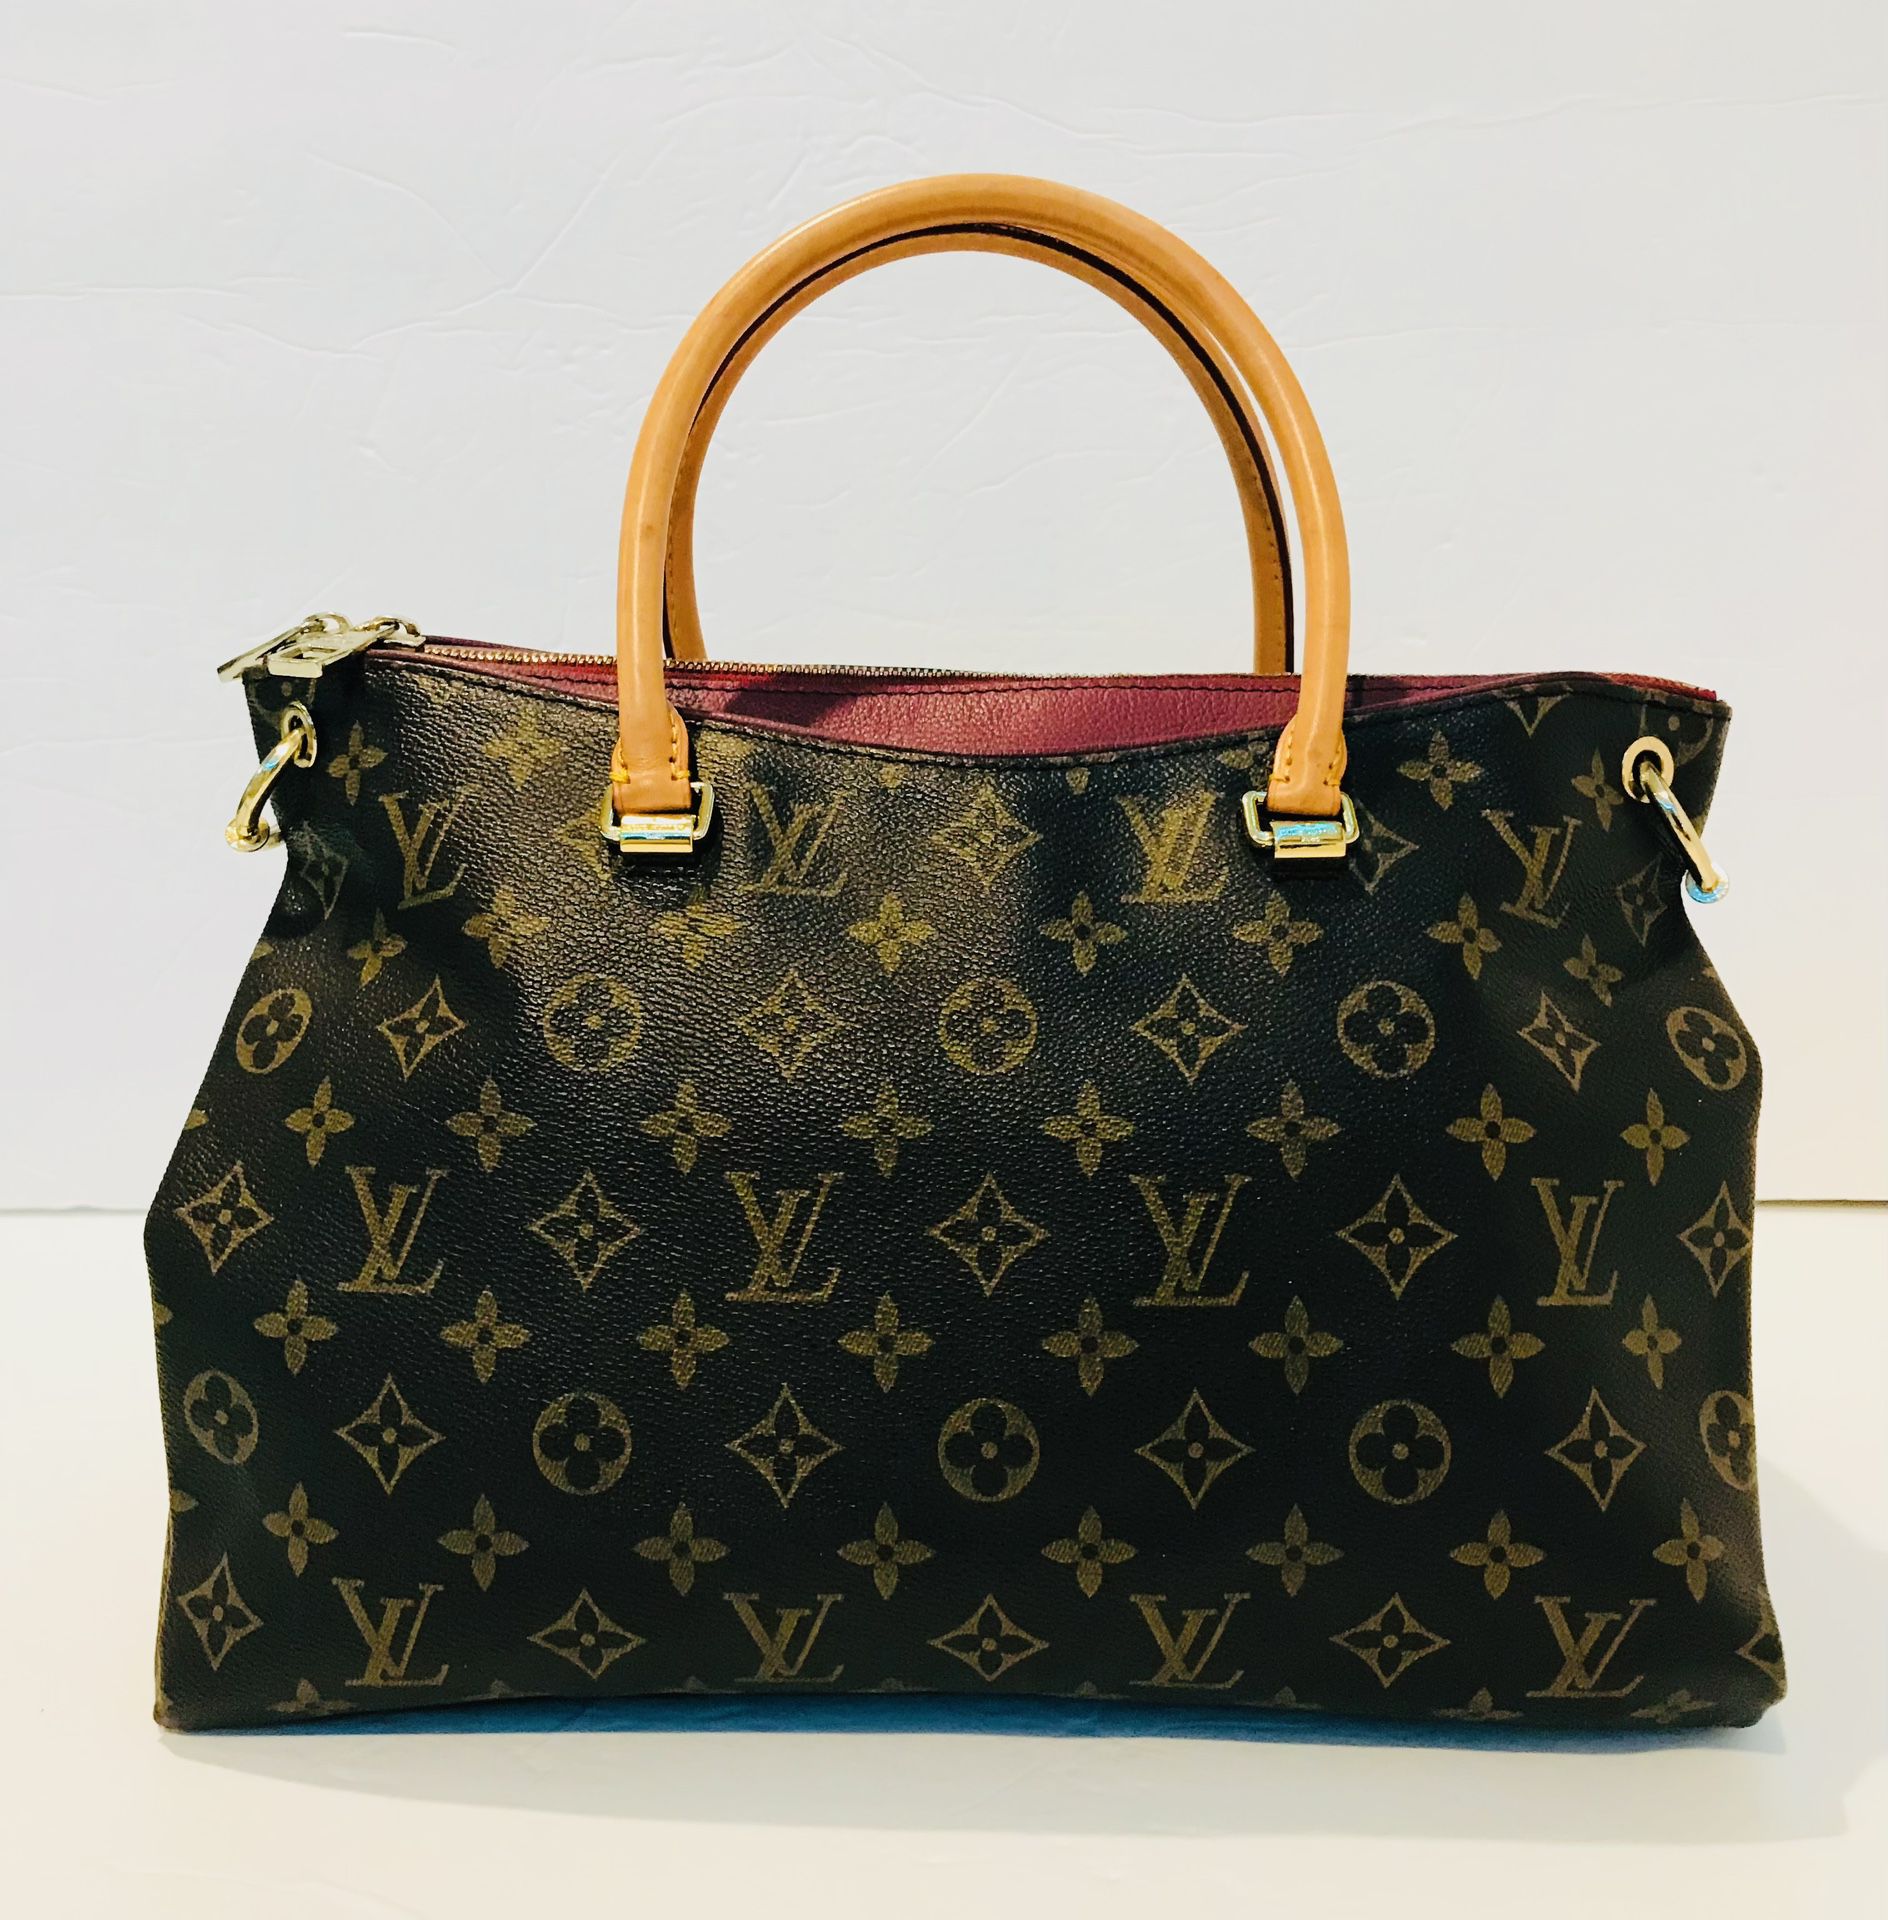 Louis Vuitton sizing - how to understand it! - Still in fashion